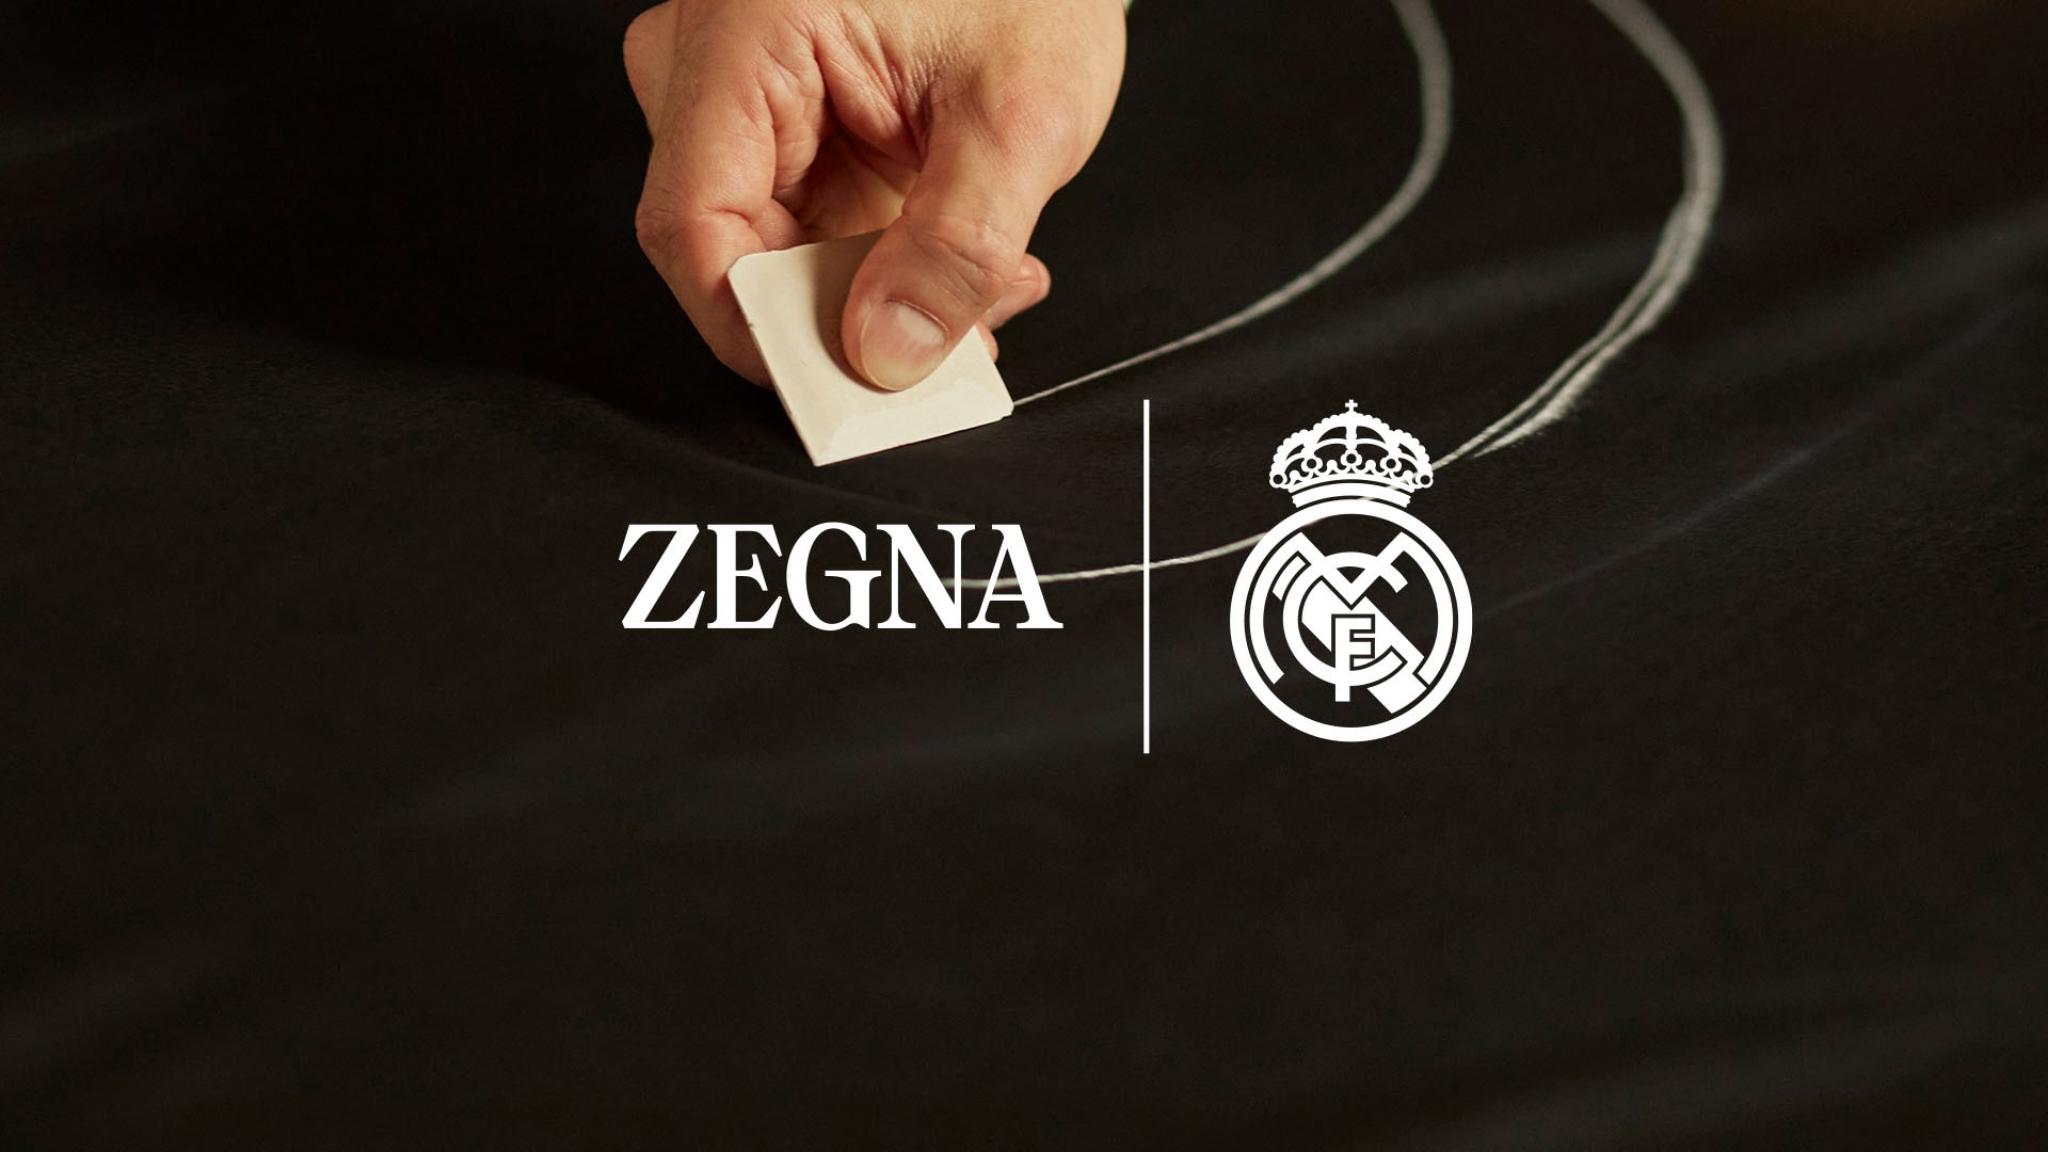 Zegna and Real Madrid Unique Partnership